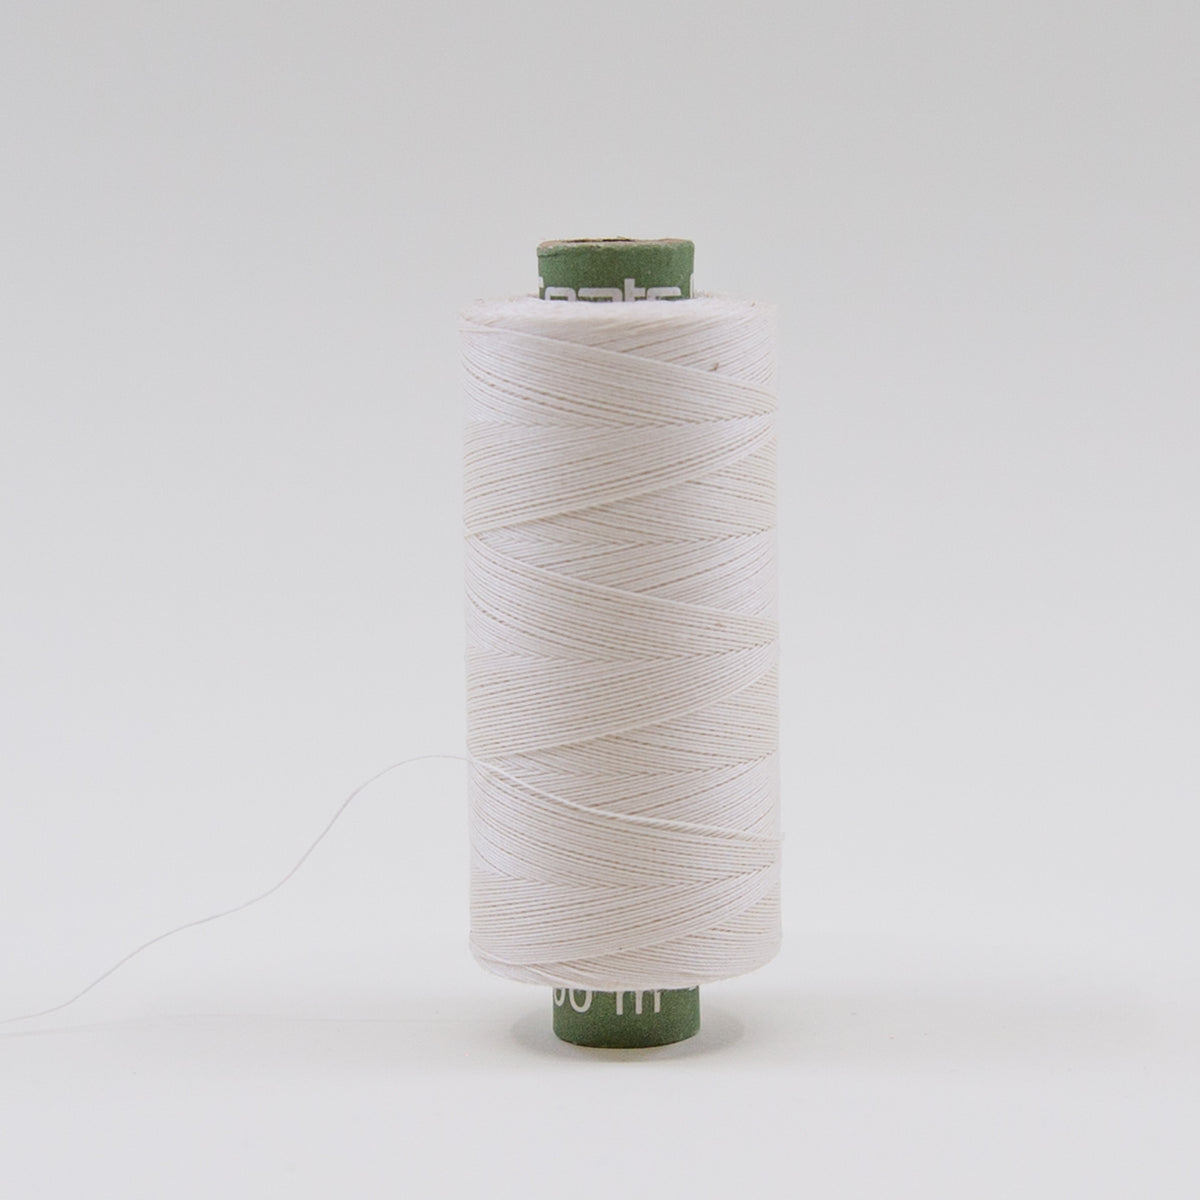 White 40S/2 10000yds Spool Polyester Sewing Machine Thread